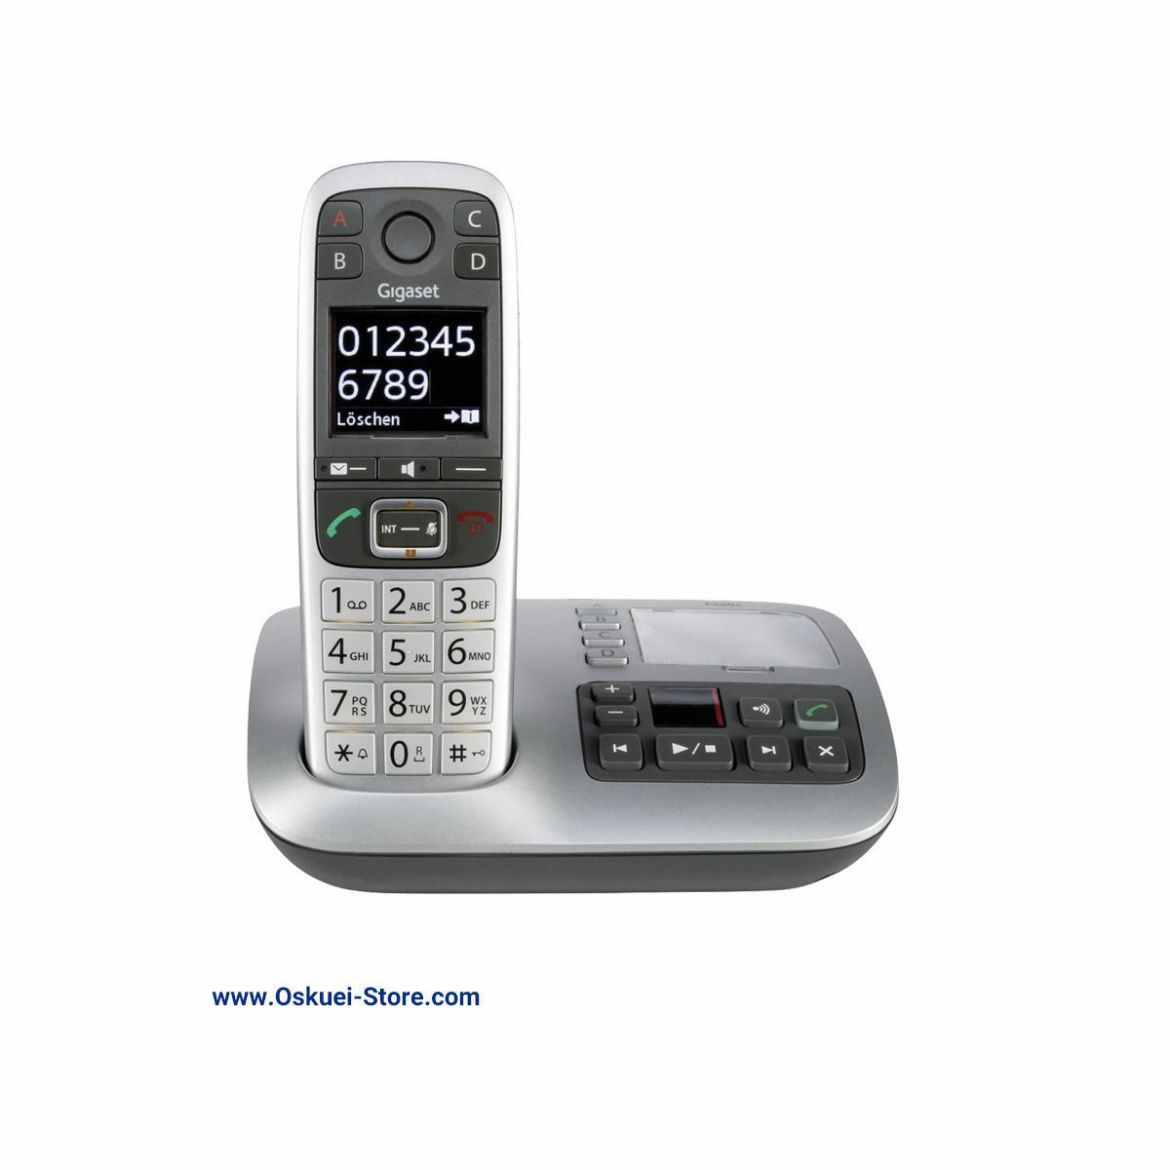 Gigaset E560 A Cordless Telephone Silver Front